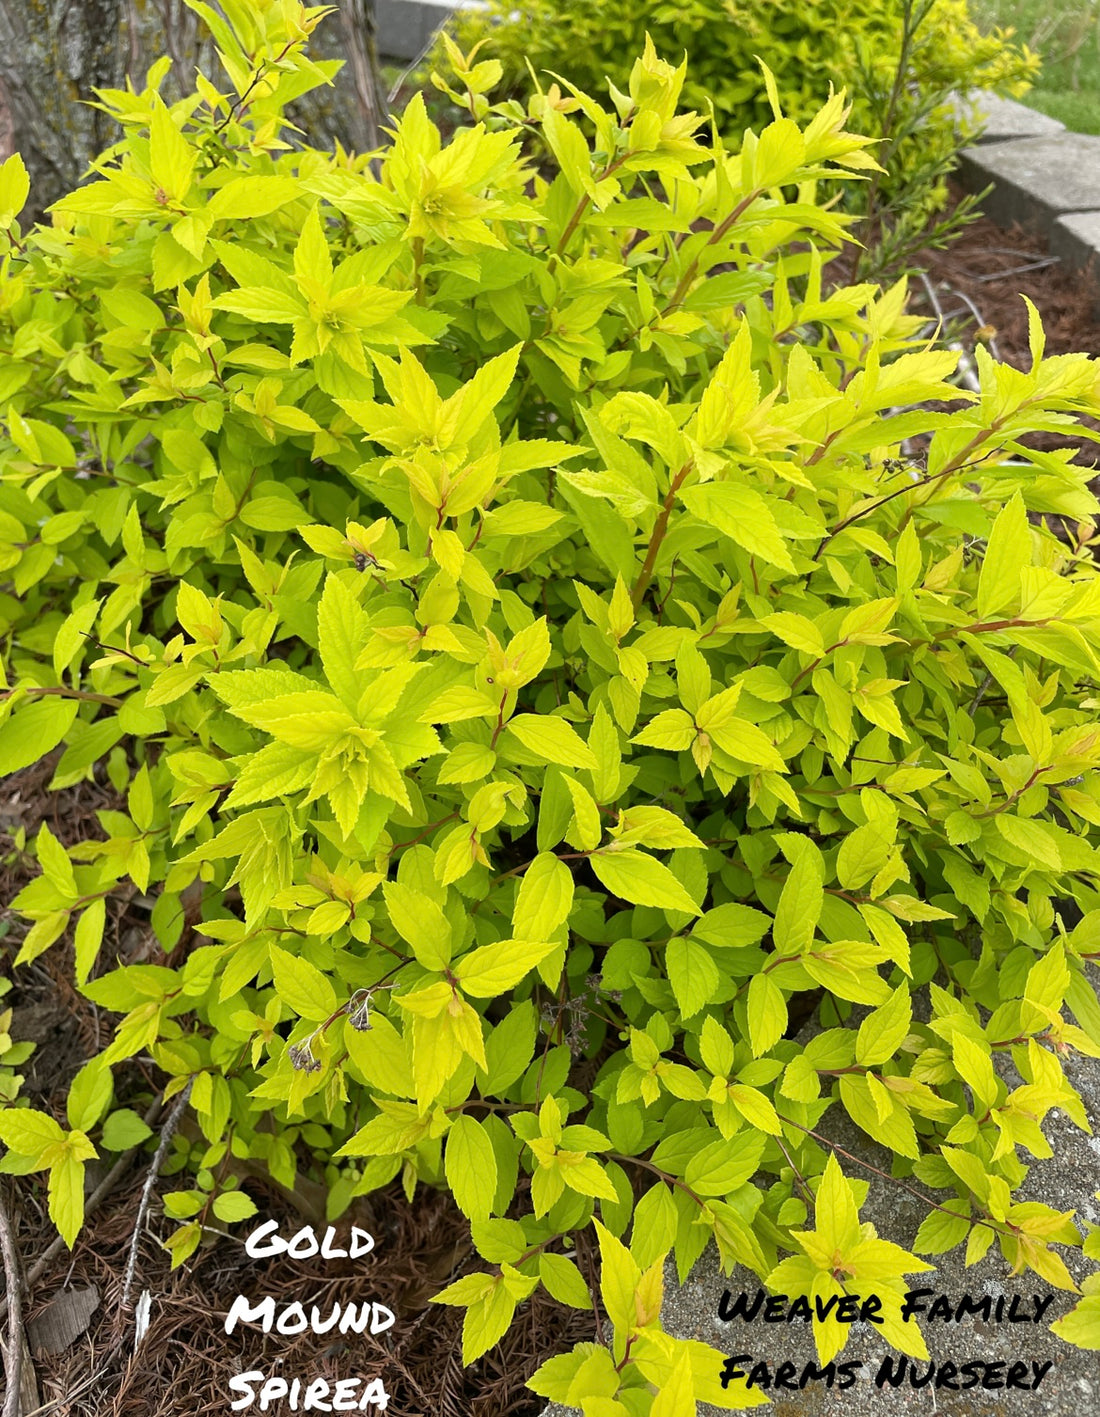 Gold Mound Spirea Pictures